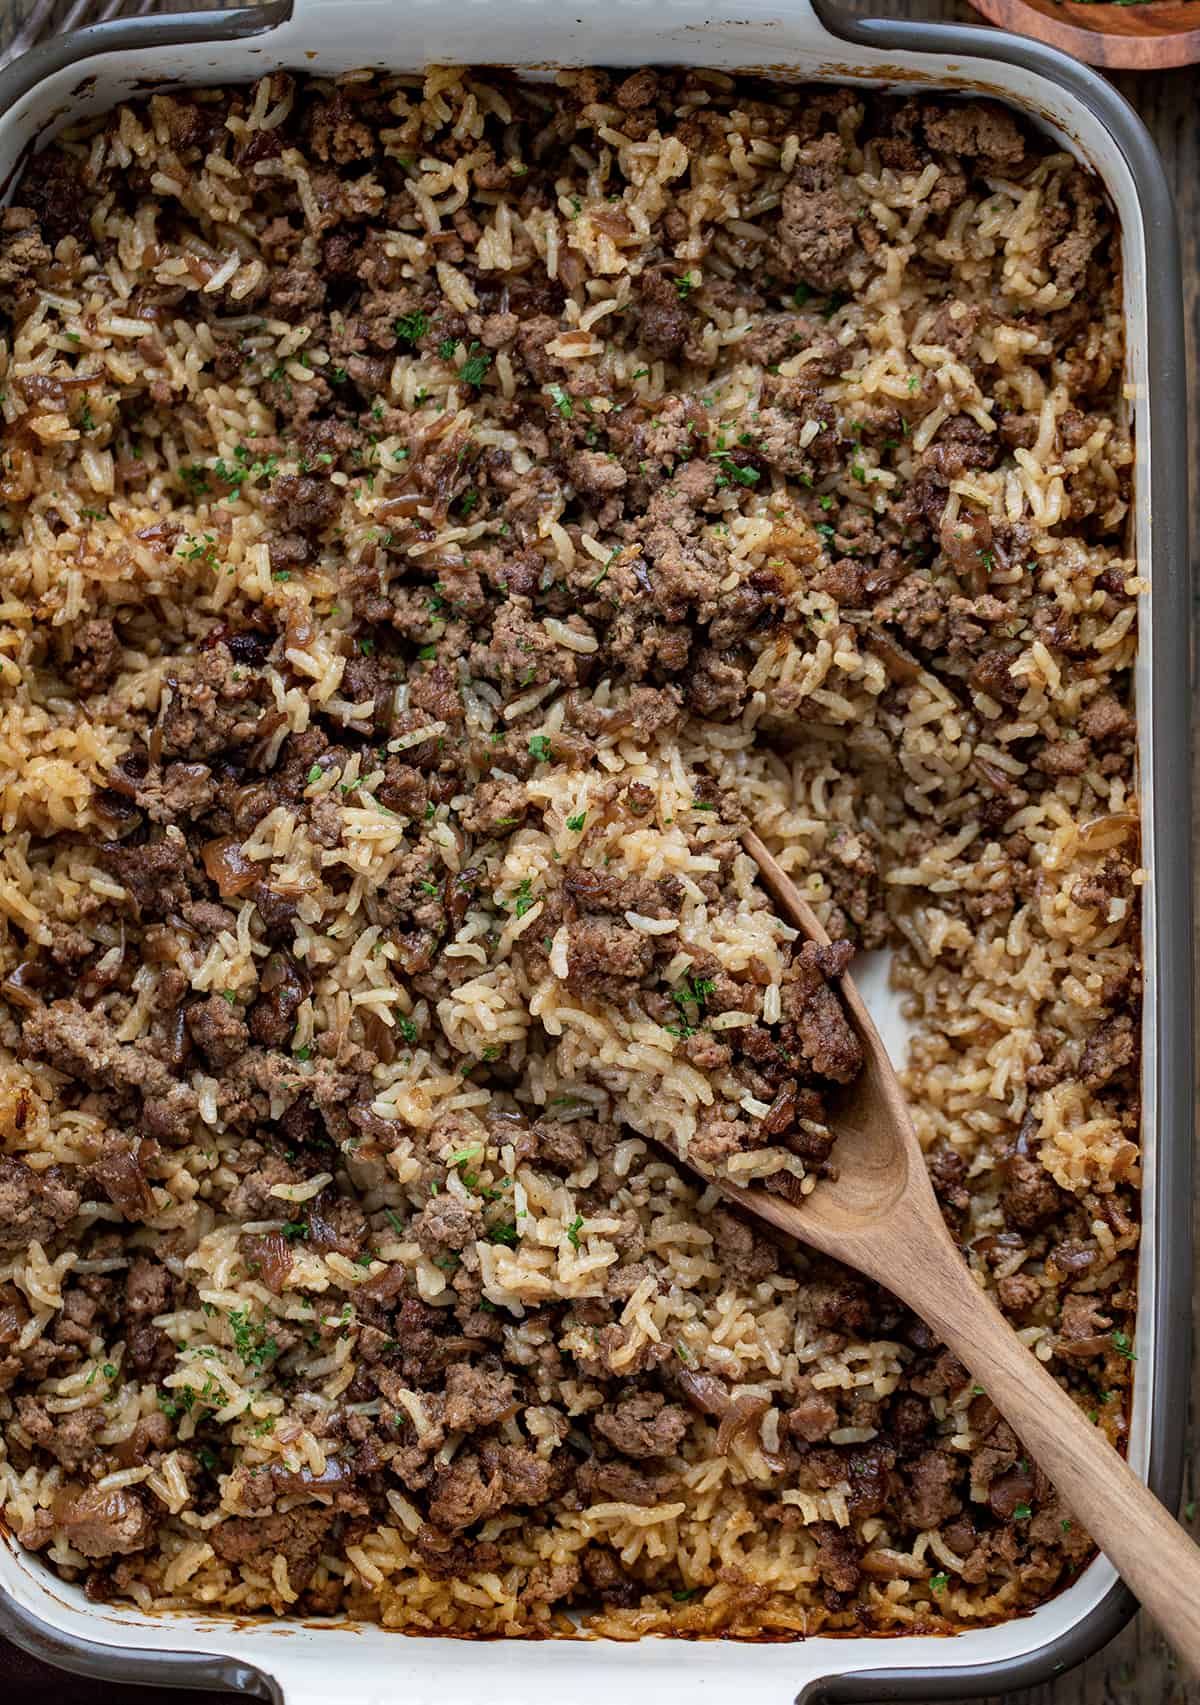 Fluffed up Easy Hamburger Rice Casserole From Overhead with a Wooden Spoon.